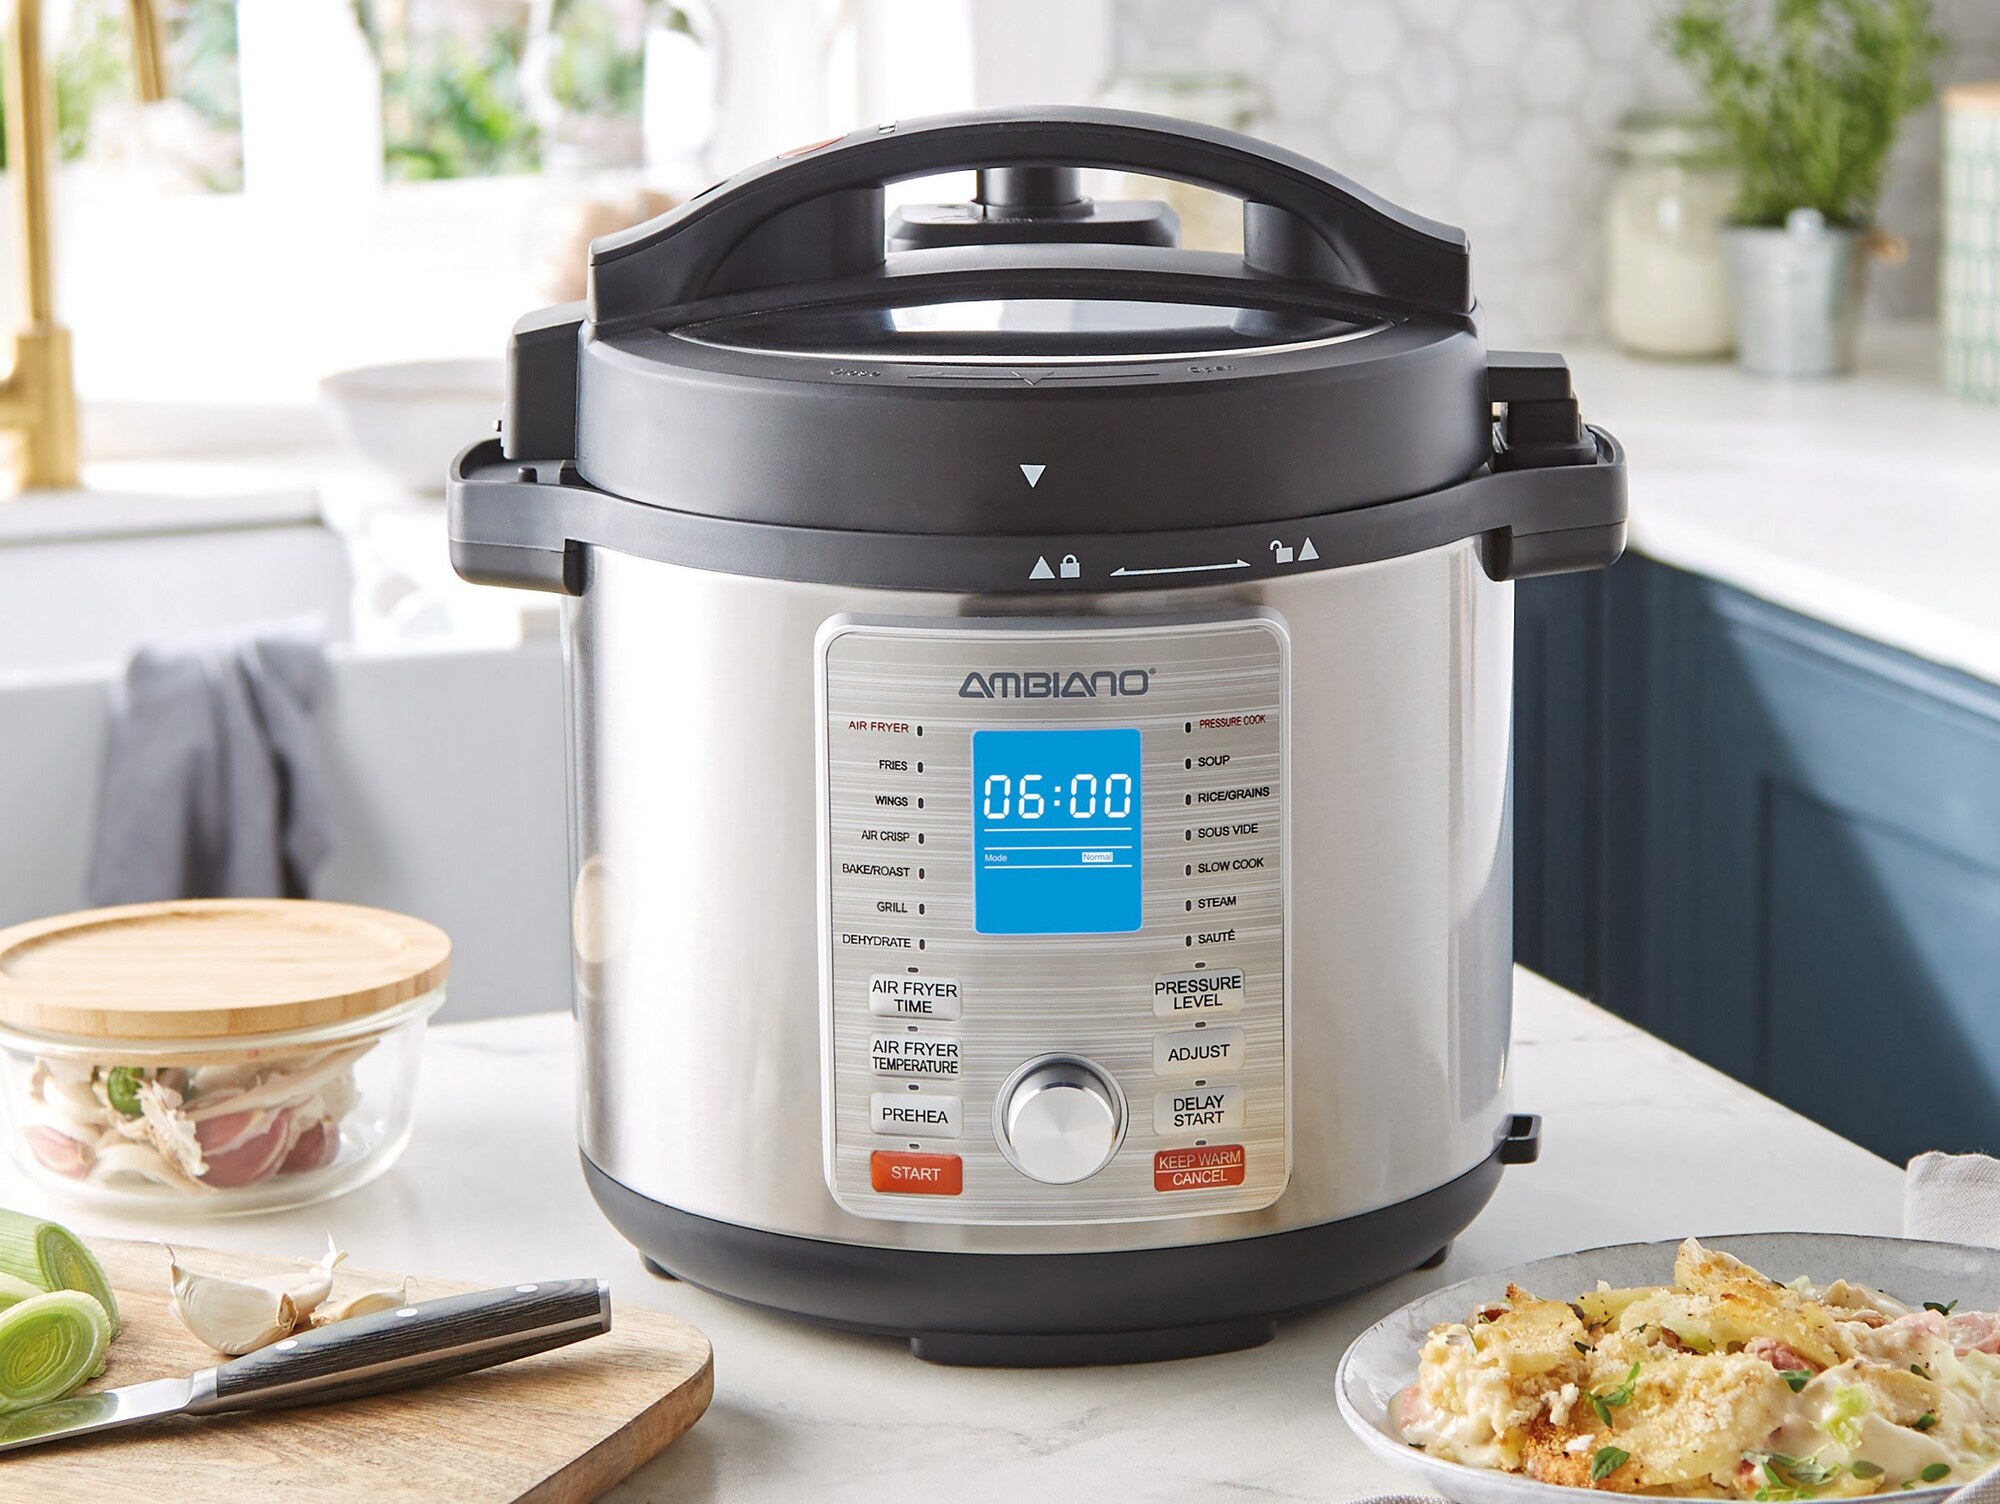 What Temperature Are The Preset Settings On The Ambiano Electric Pressure Cooker?